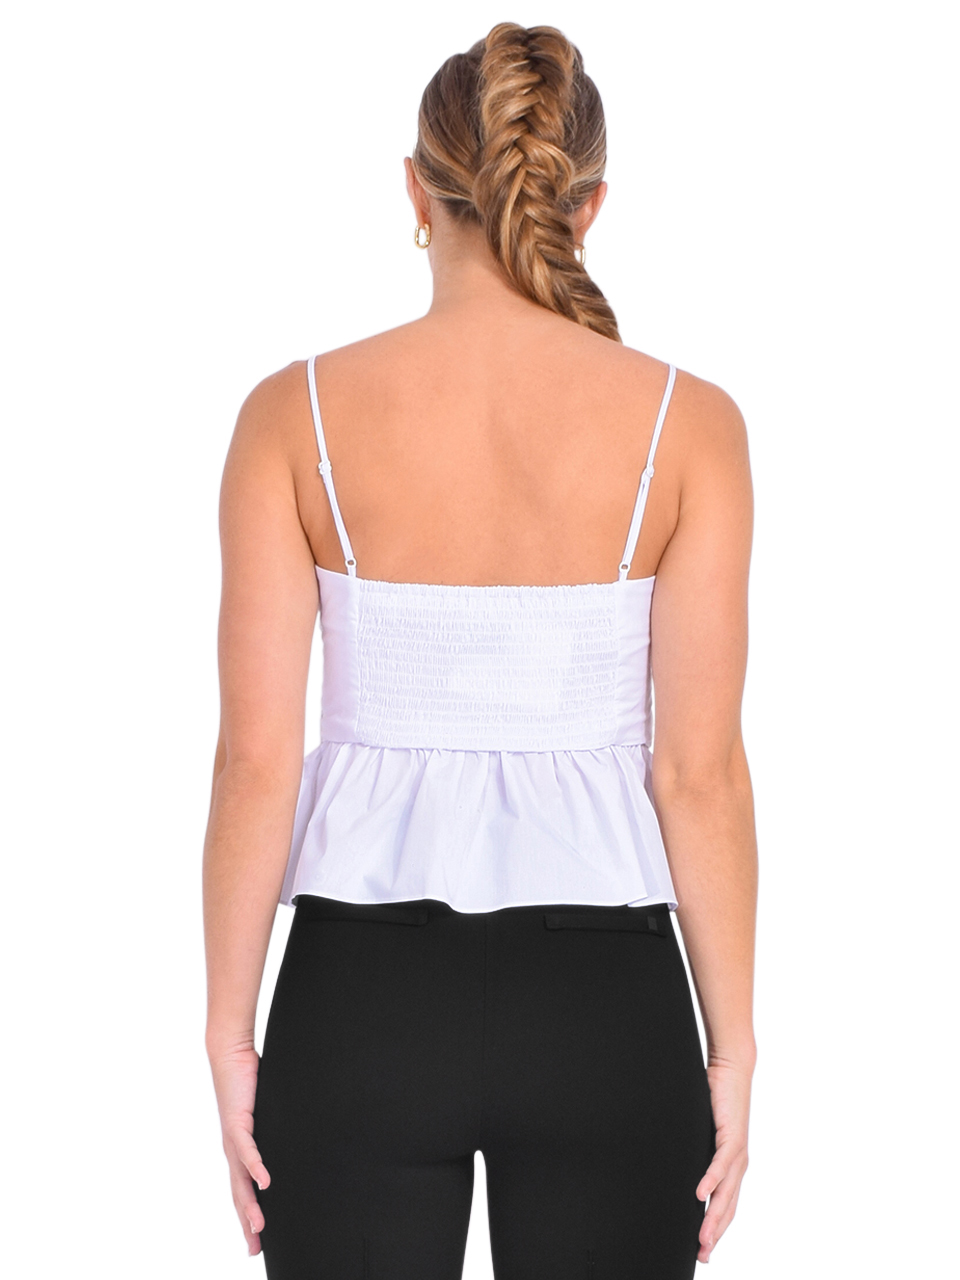 TANYA TAYLOR Hayes Top in White Back View 
